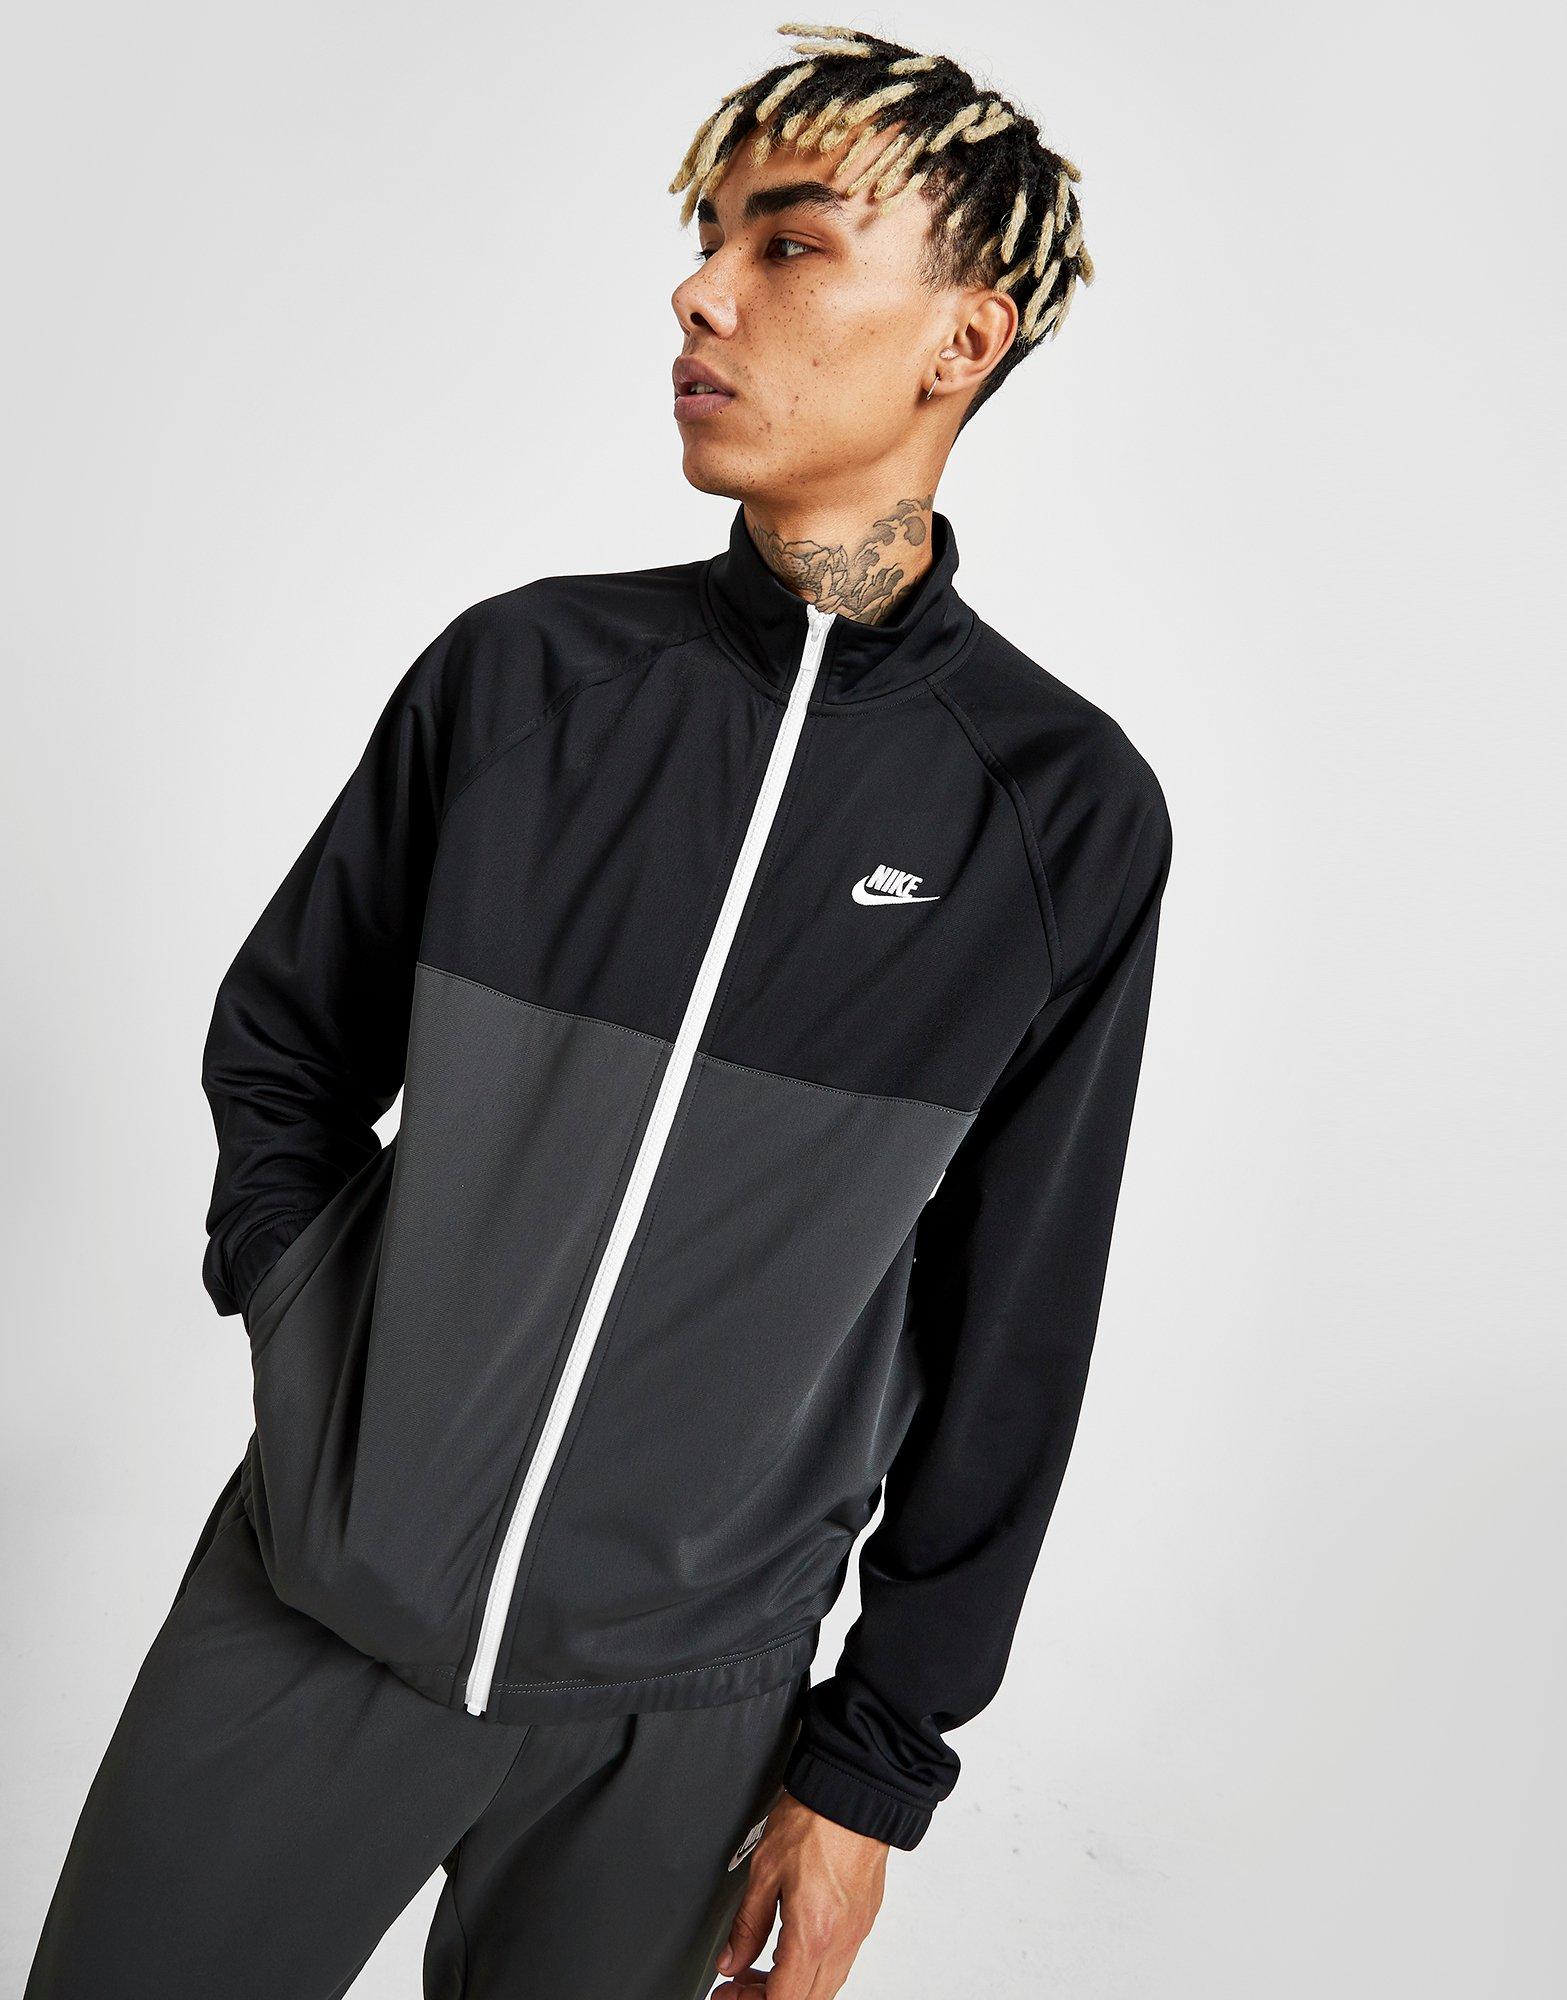 Black Nike Griffin Track Top | JD Sports